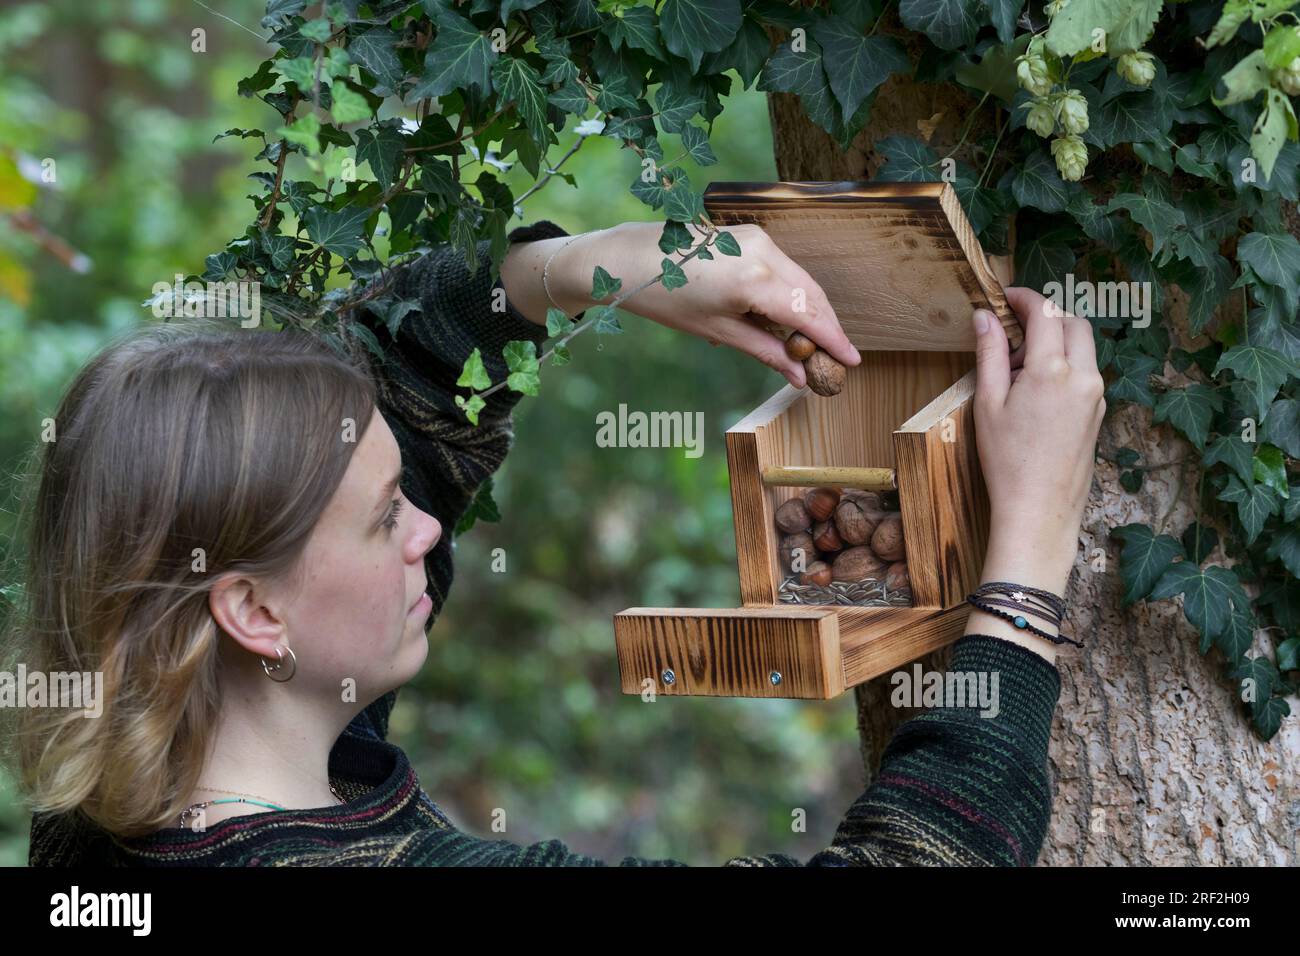 making a feeder for squirrels, step 13: ready box is filled with fodder, series picture 13/13 Stock Photo